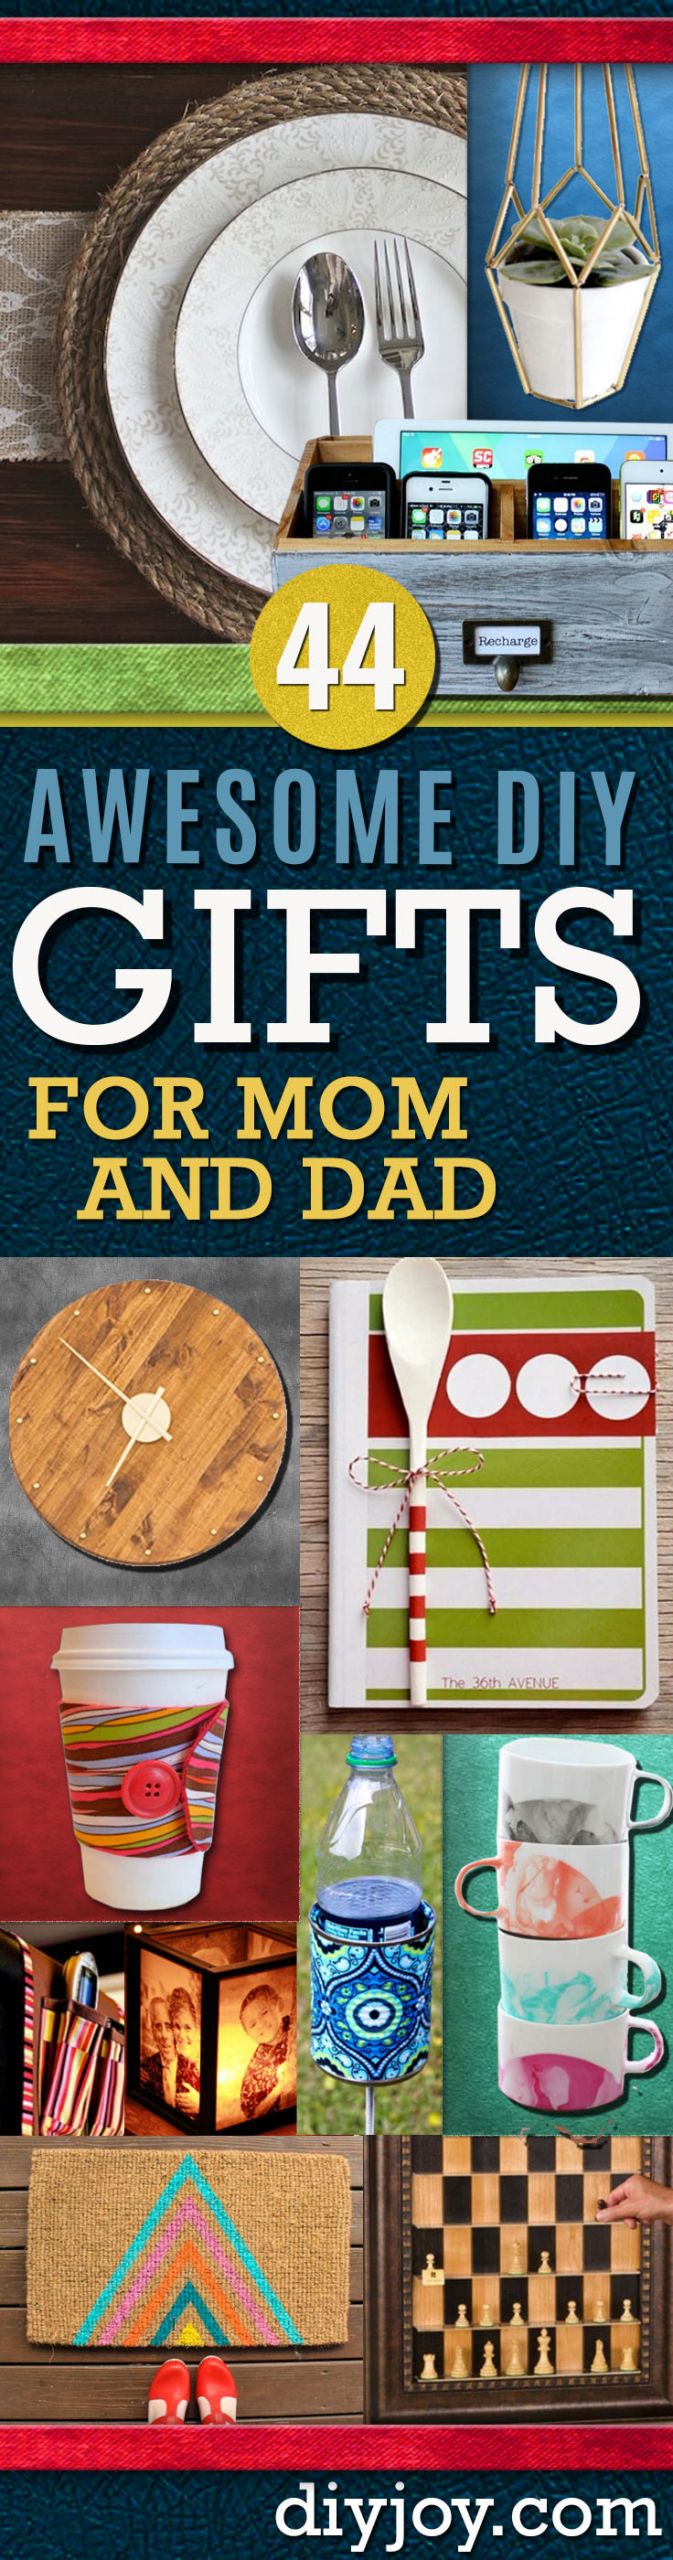 Christmas Gift Ideas For Dads<br />
 Awesome DIY Gift Ideas Mom and Dad Will Love